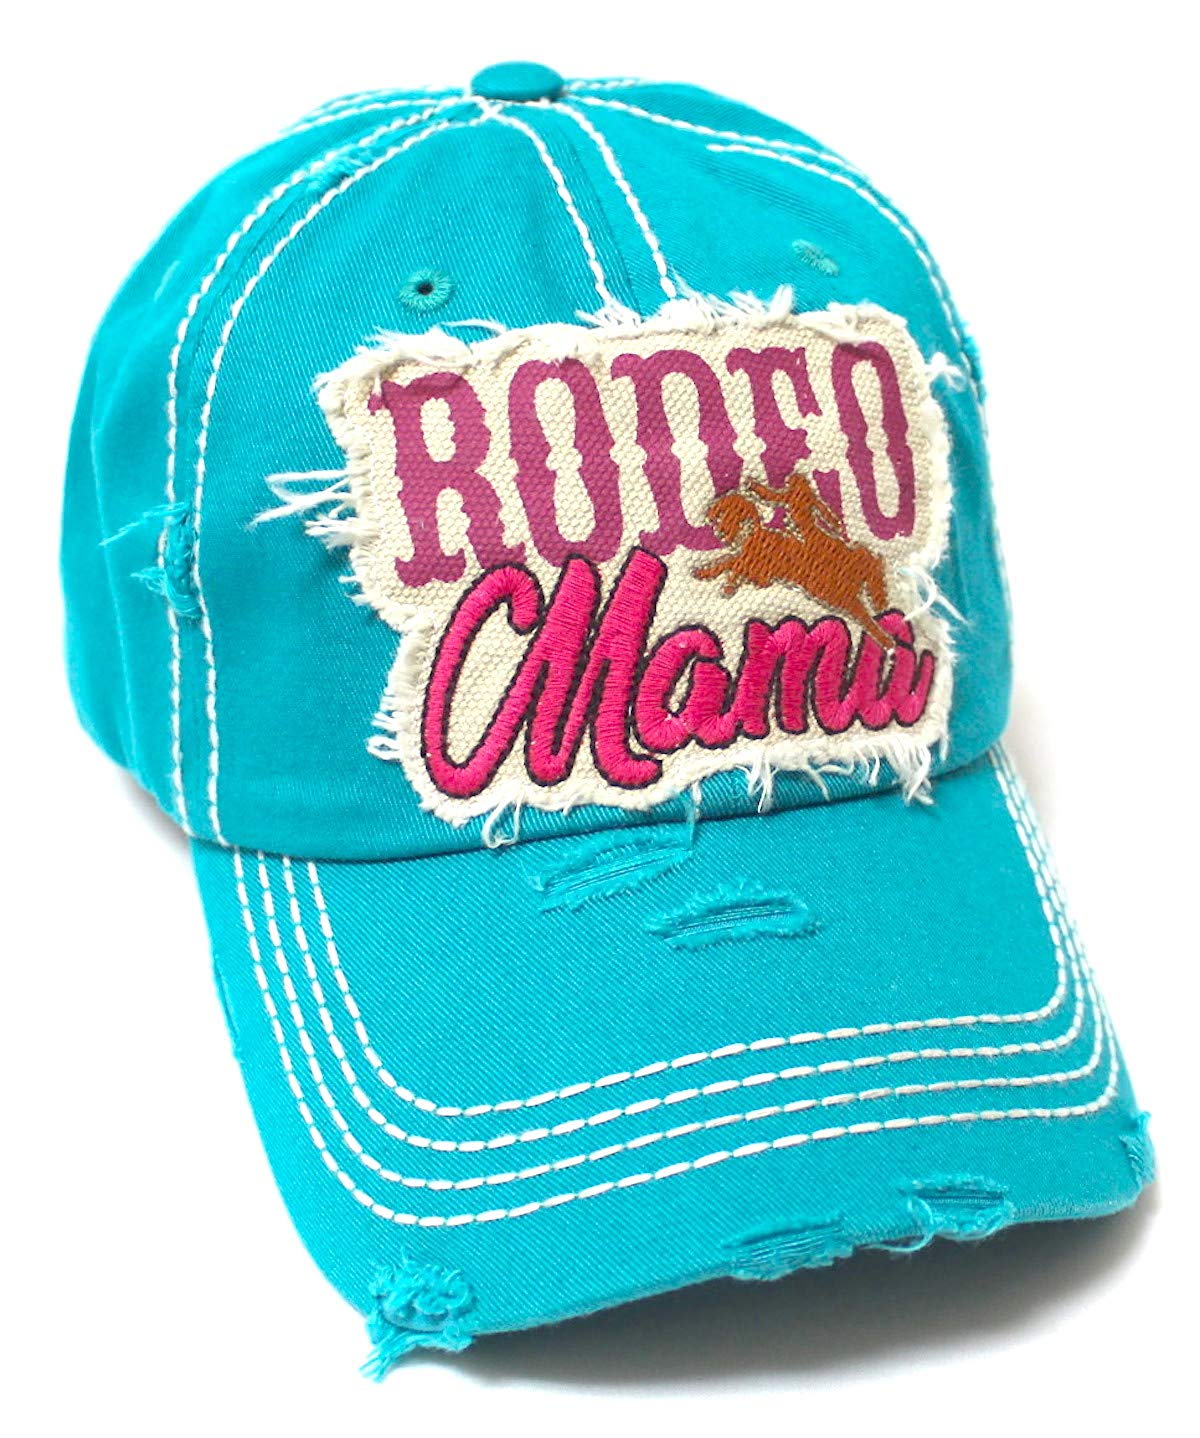 Classic Country Western Ballcap Rodeo Mama Monogram Patch Embroidery Adjustable Baseball Hat, Turquoise - Caps 'N Vintage 